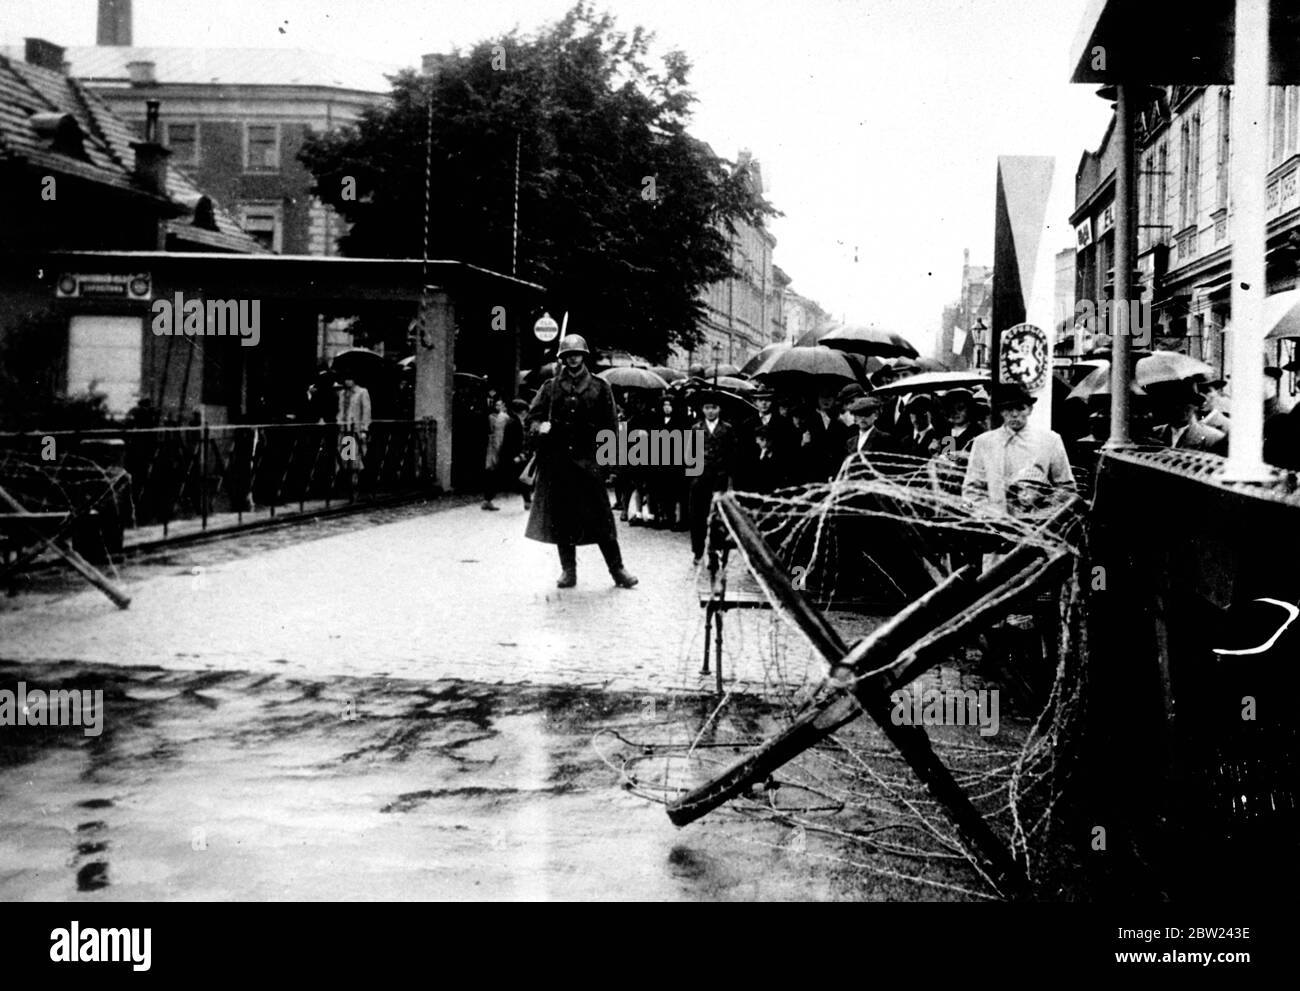 Polish forces are now in occupation of Teschen, the Polish minority district, which was ceded to Poland by Czechoslovakia in compliance with the ultimatum from Poland. The Polish demand came simultaneously with a German diplomat victory in the Sudetenland disputes. Photo shows: Citizens of Teschen waiting in the rain to greet the Polish troops when they crossed the bridge marking the old Czechoslovak Polish frontier. October 1938 Stock Photo